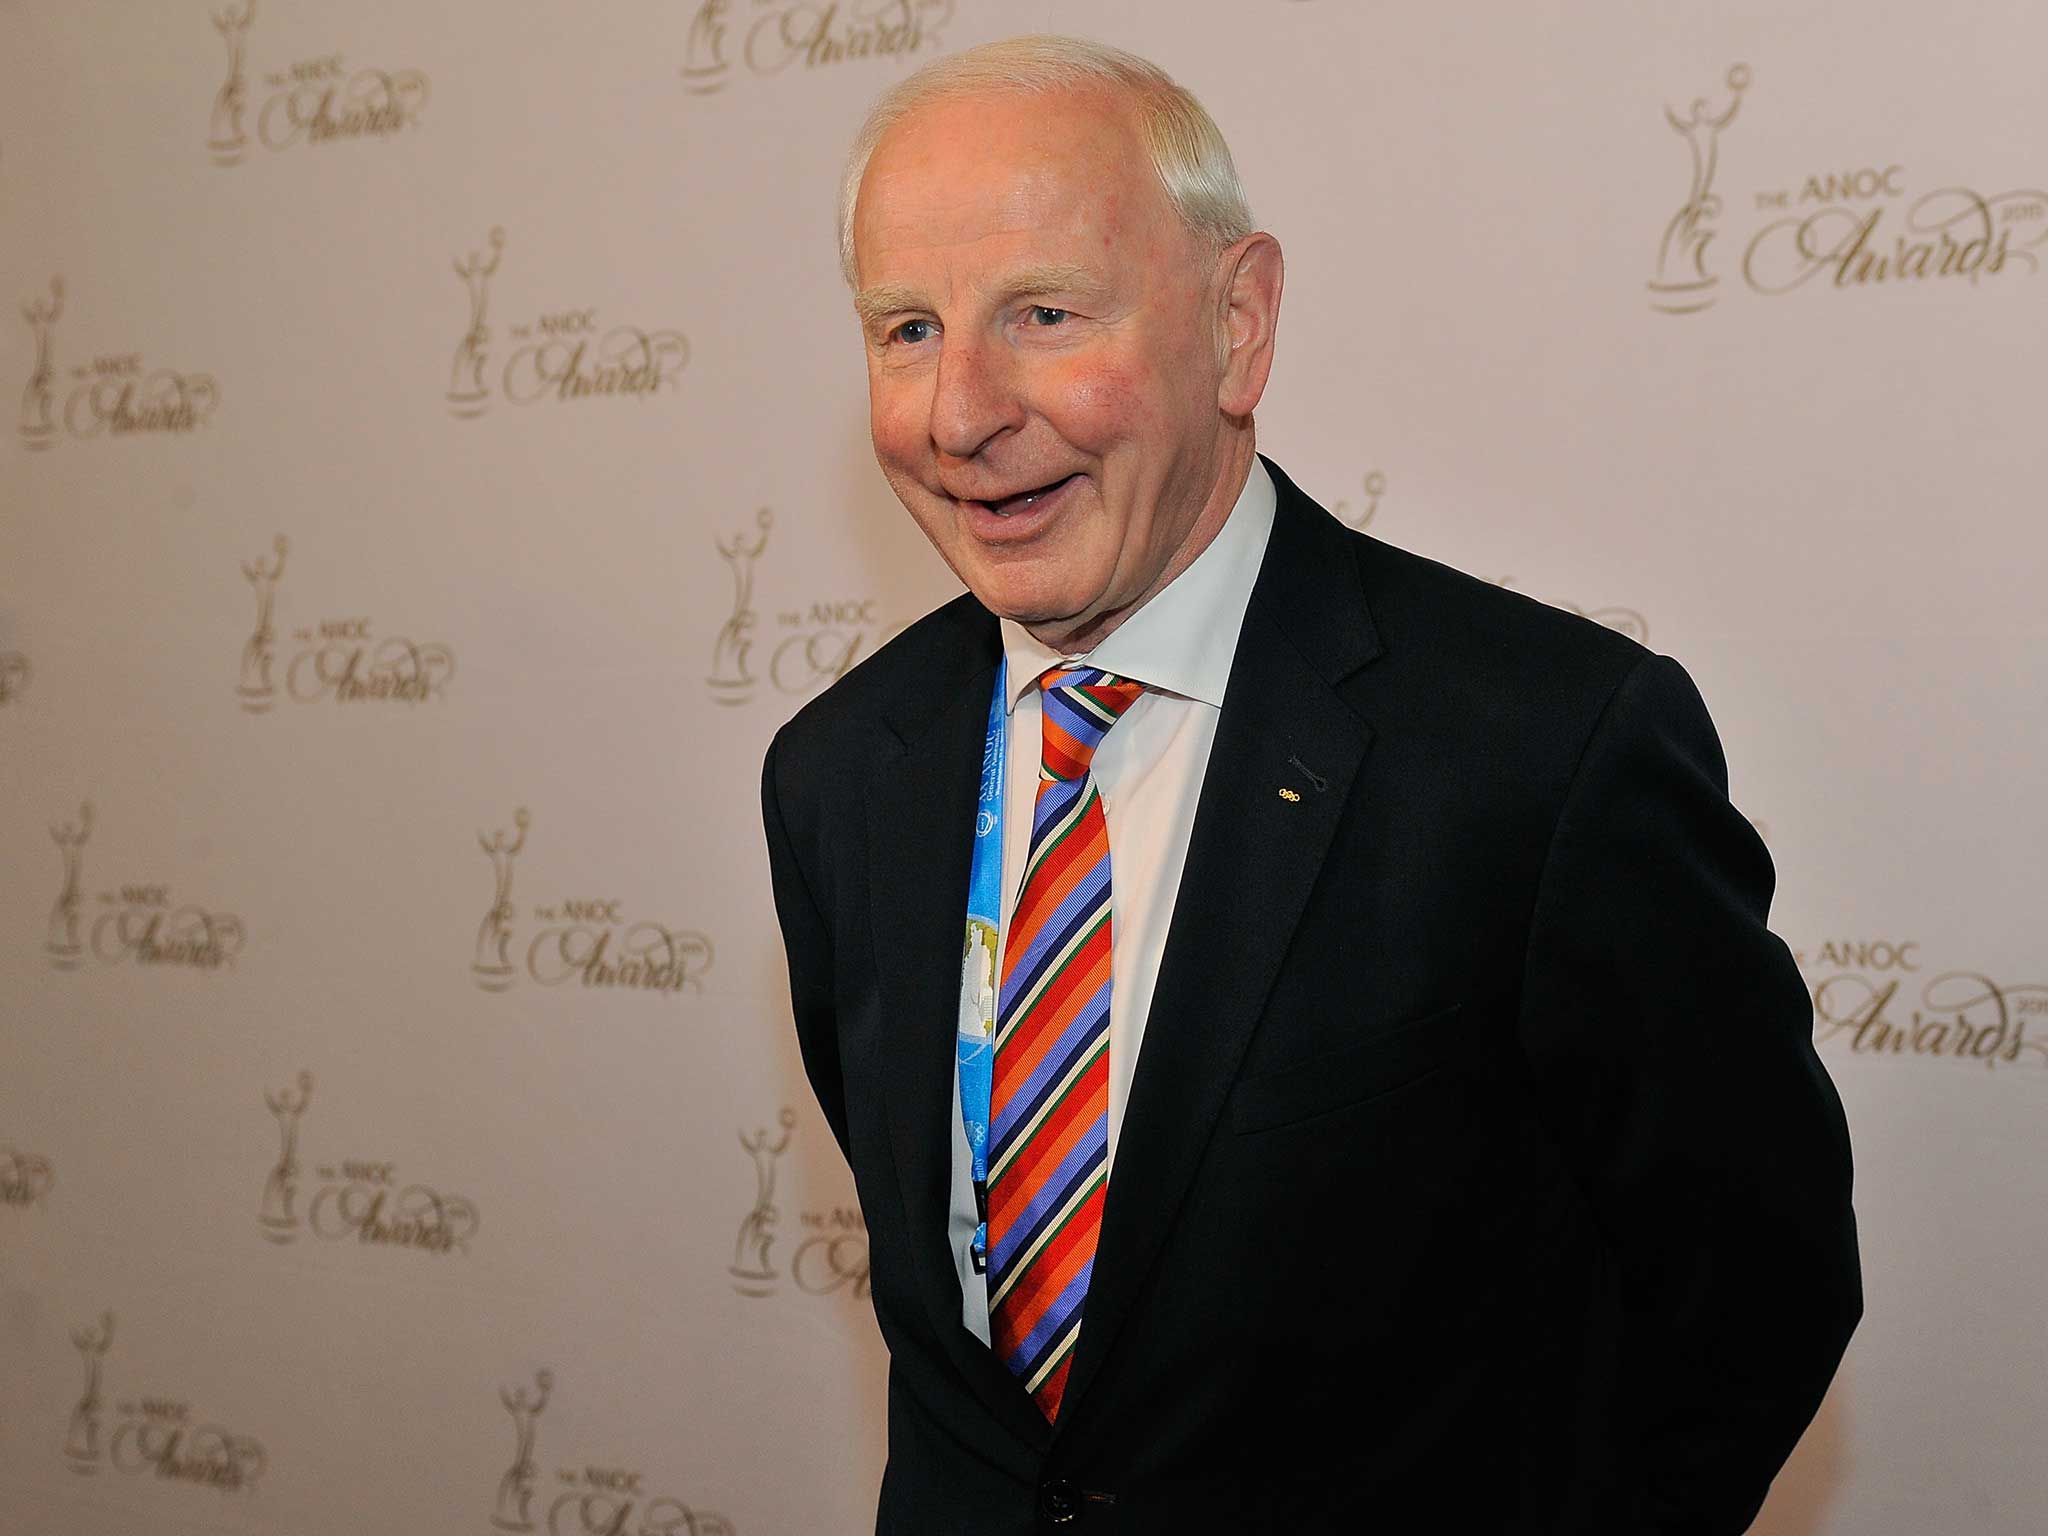 Patrick Hickey is one of the leading officials in European sport